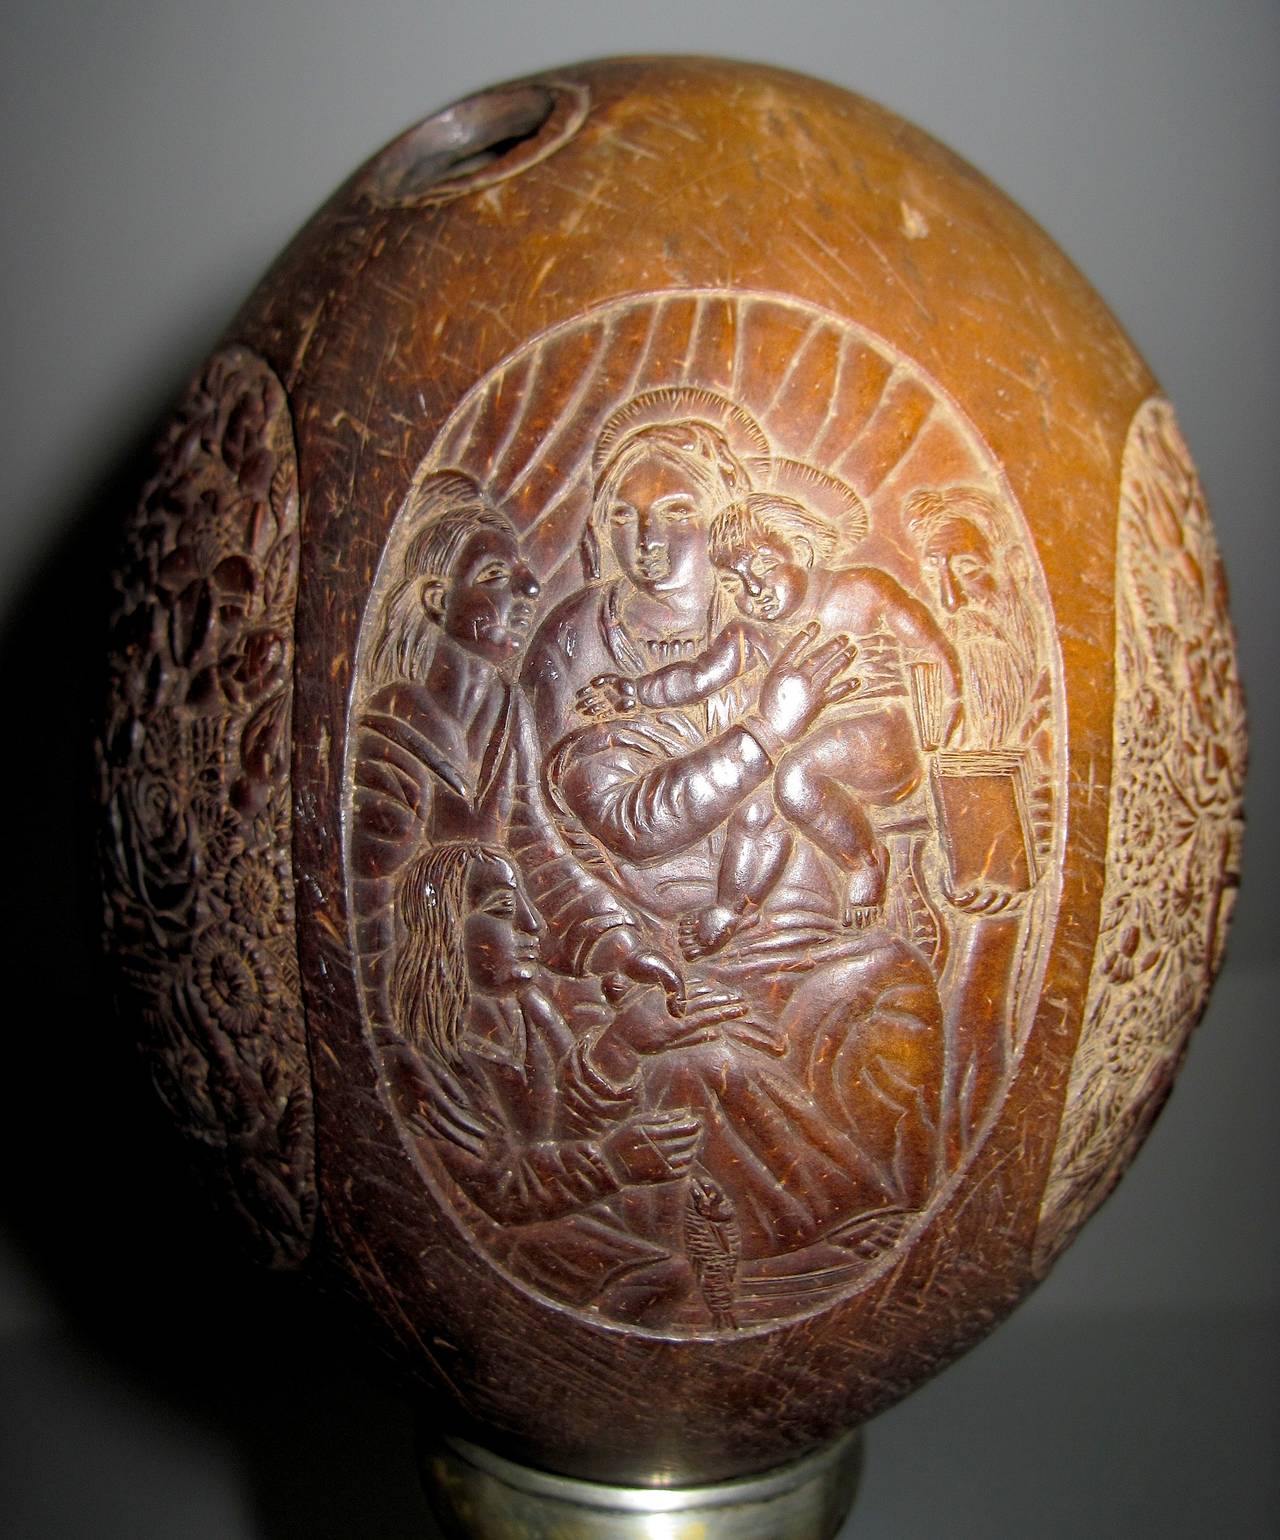 This rare and unusual object is a hand-carved coconut done in the Indian city of Goa, during the era of Portuguese colonization. The workmanship of the exquisite carving is superb in every way and shows the highest level of skill. In Goa, evidence